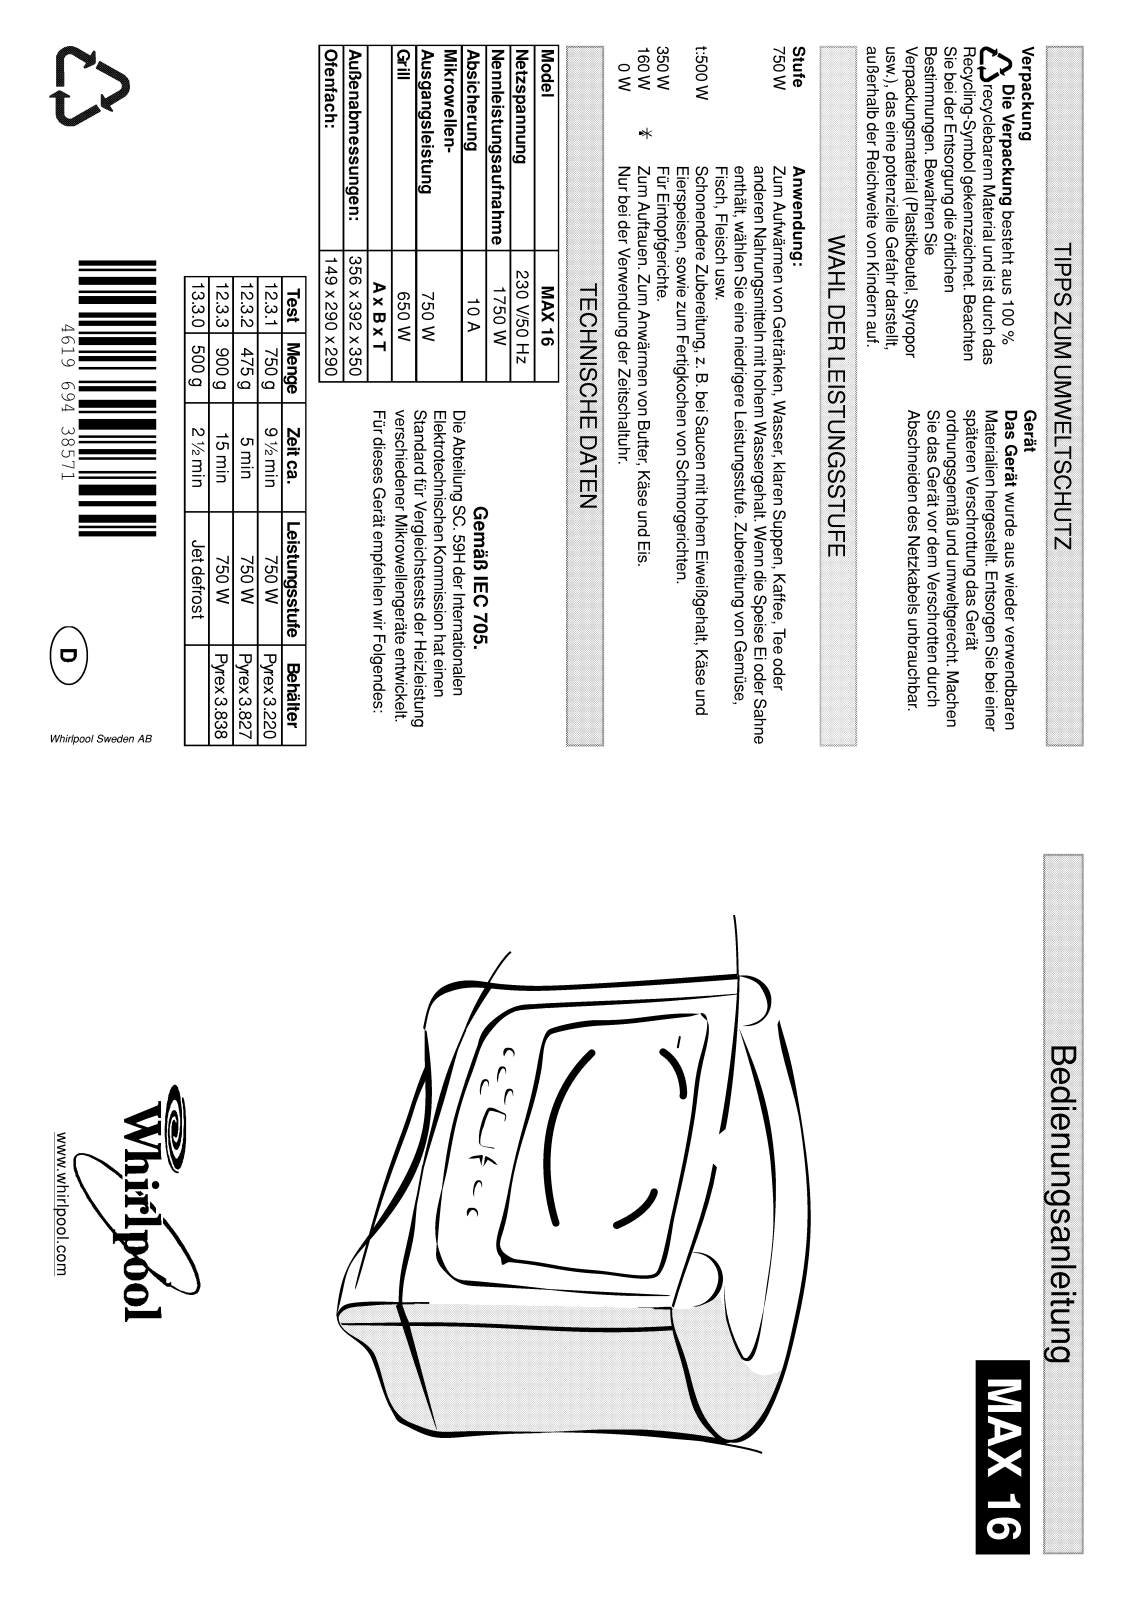 Whirlpool MAX 16/2/BL, MAX 16/WH, MAX 16/BL INSTRUCTION FOR USE